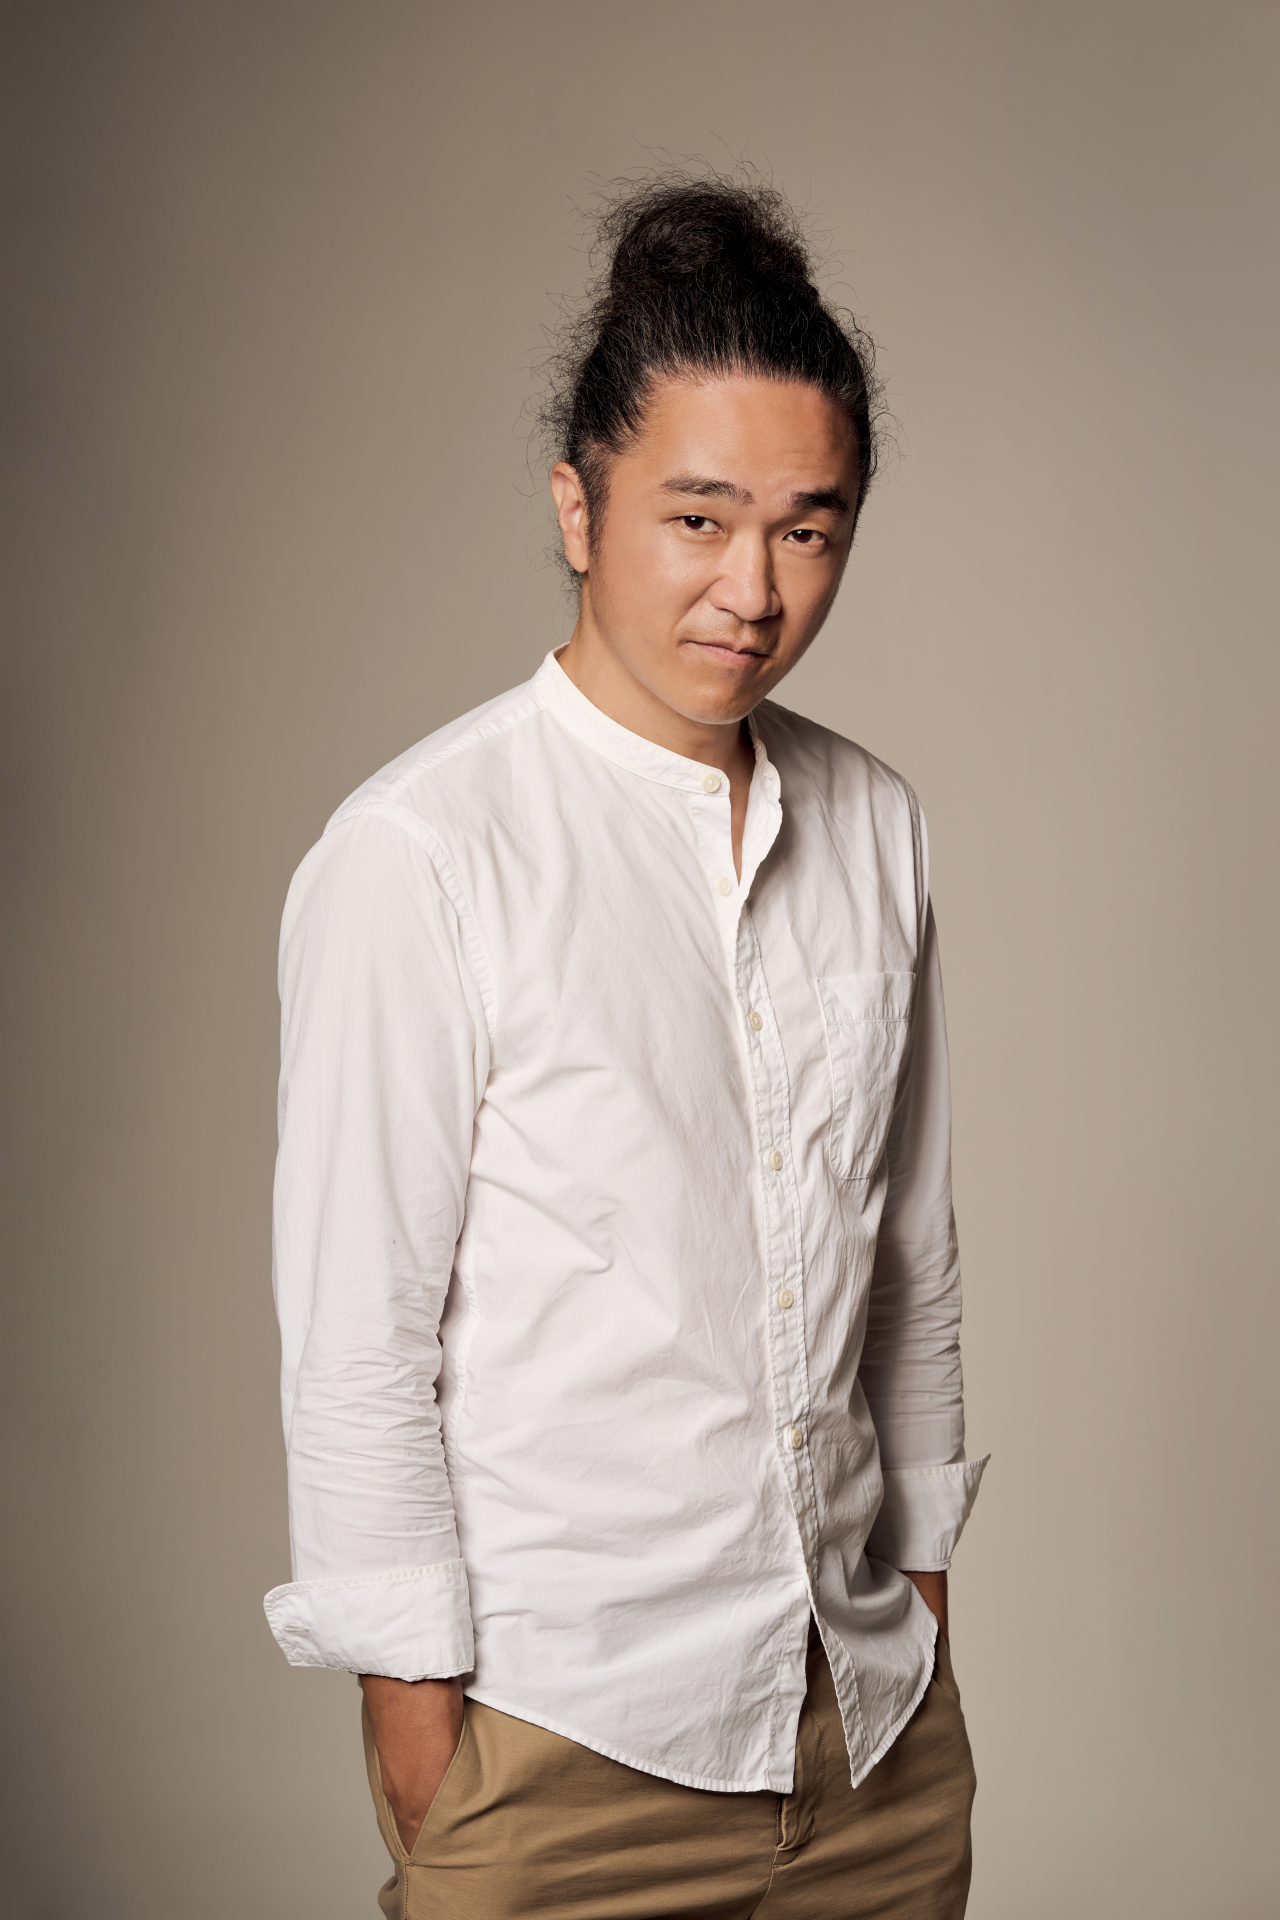 Choi Jae-yoon, founder and CEO of Hello82 (Hello82)